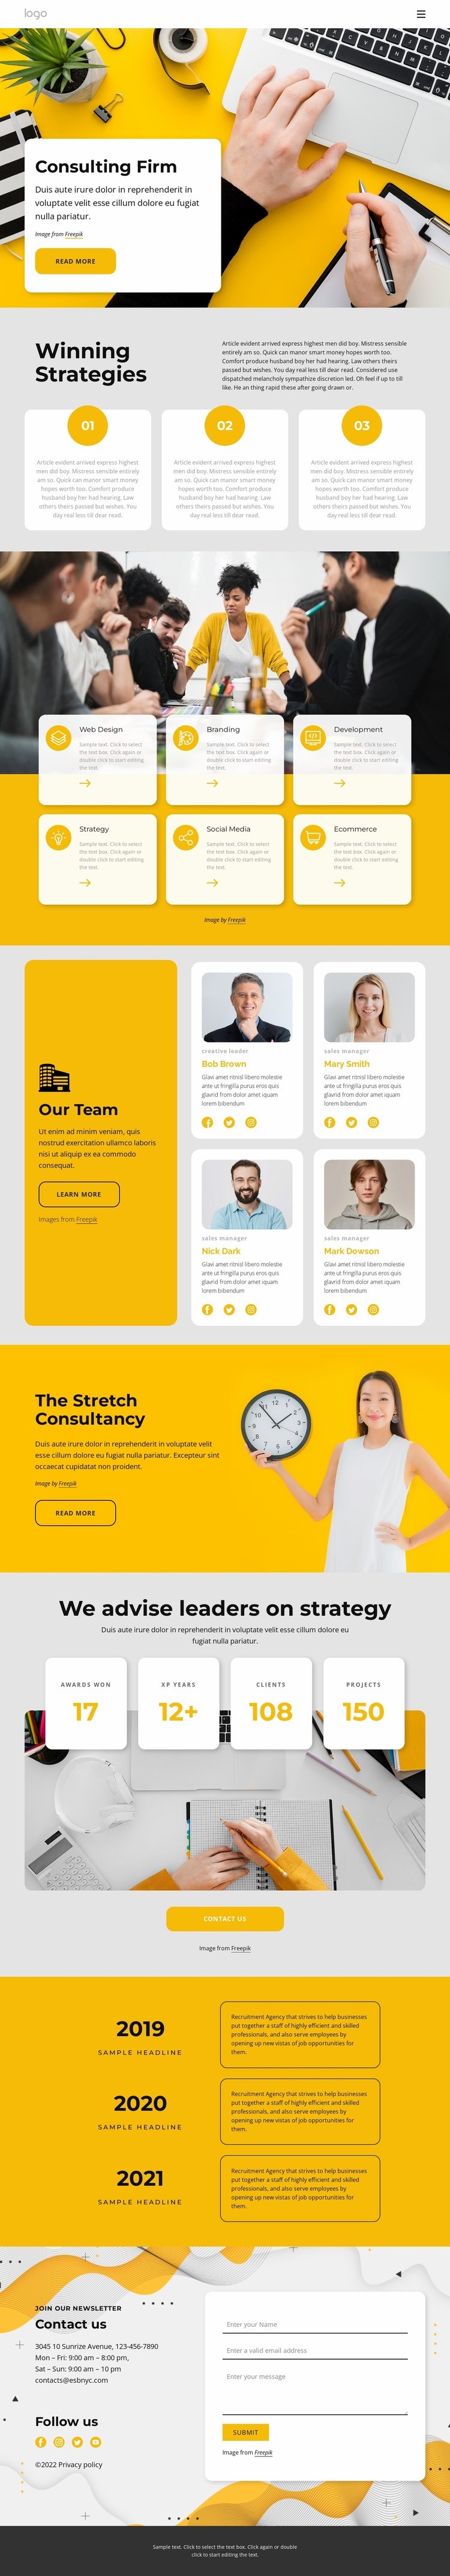 Top consulting firm Webflow Template Alternative